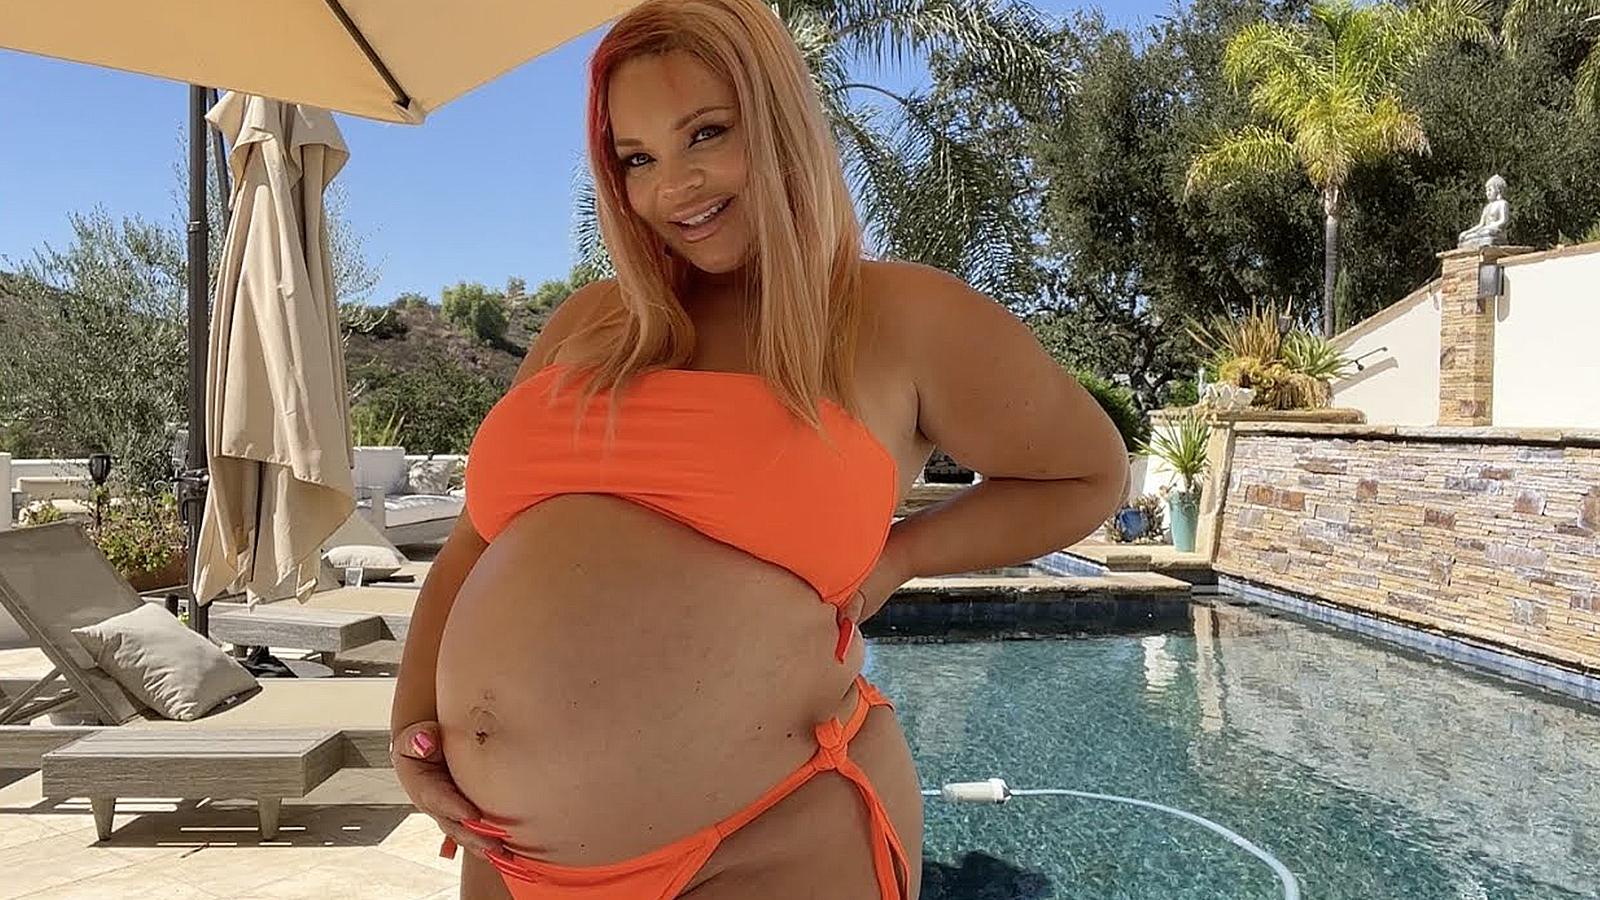 Trisha Paytas names first child after a Barbie doll